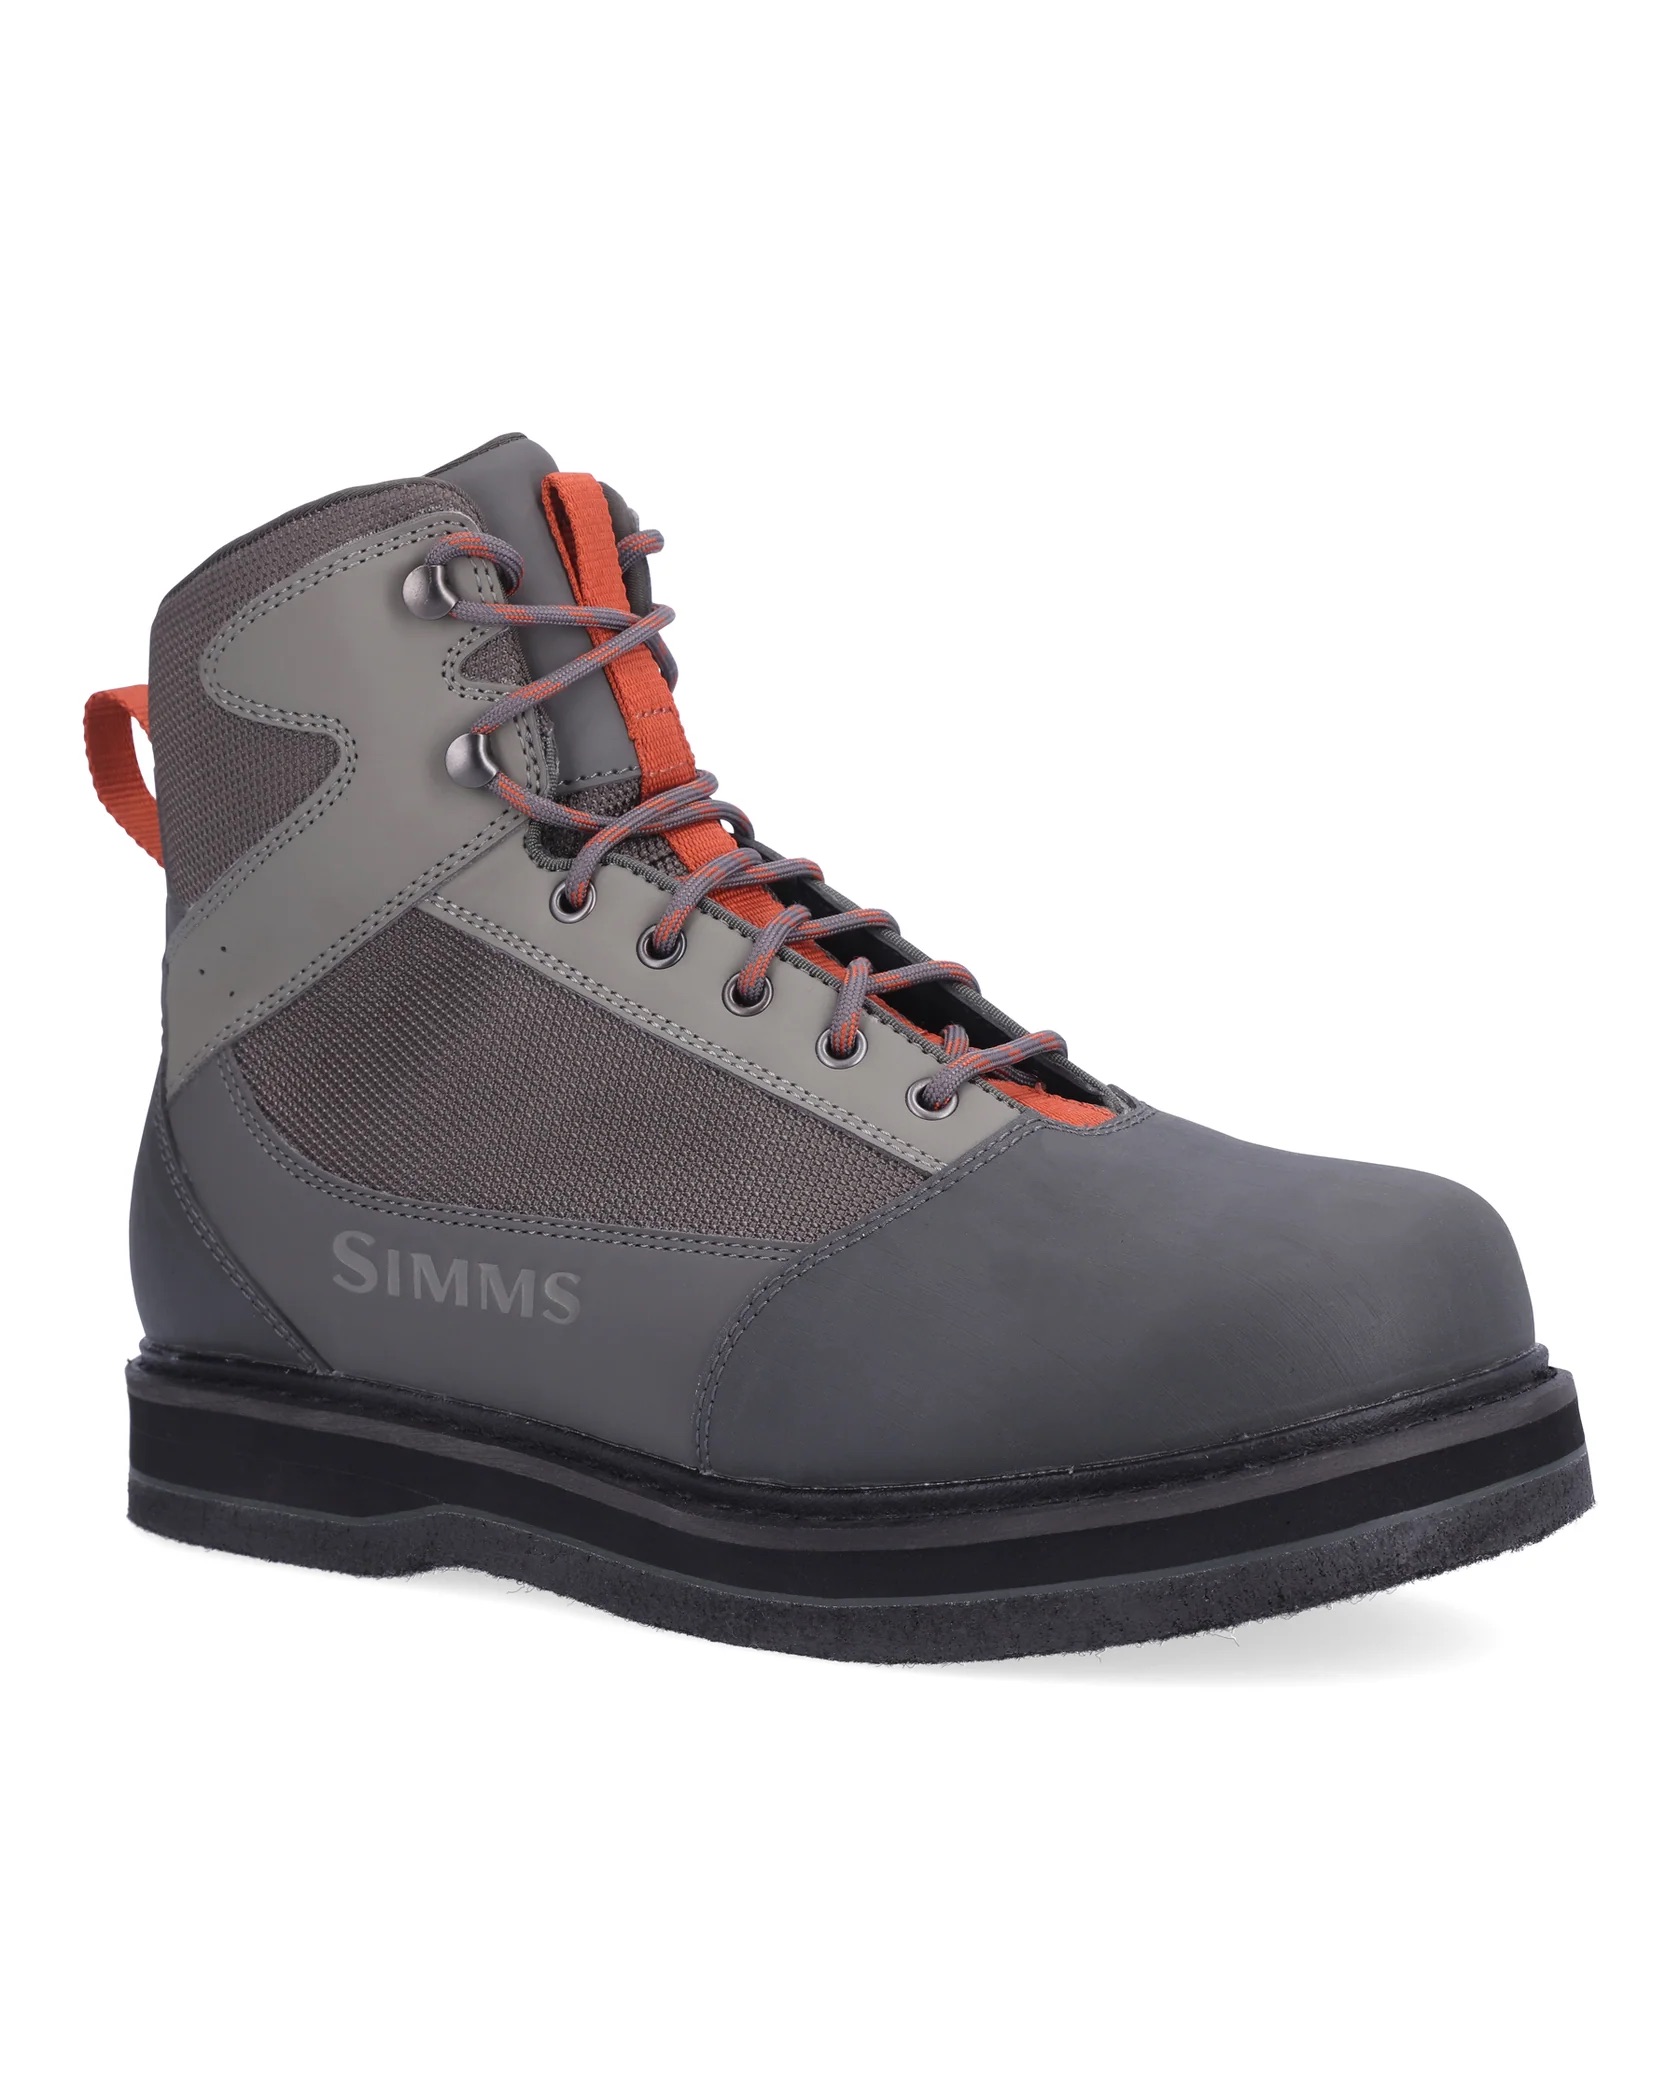 Simms Tributary Wading Boot - Felt - Size 7